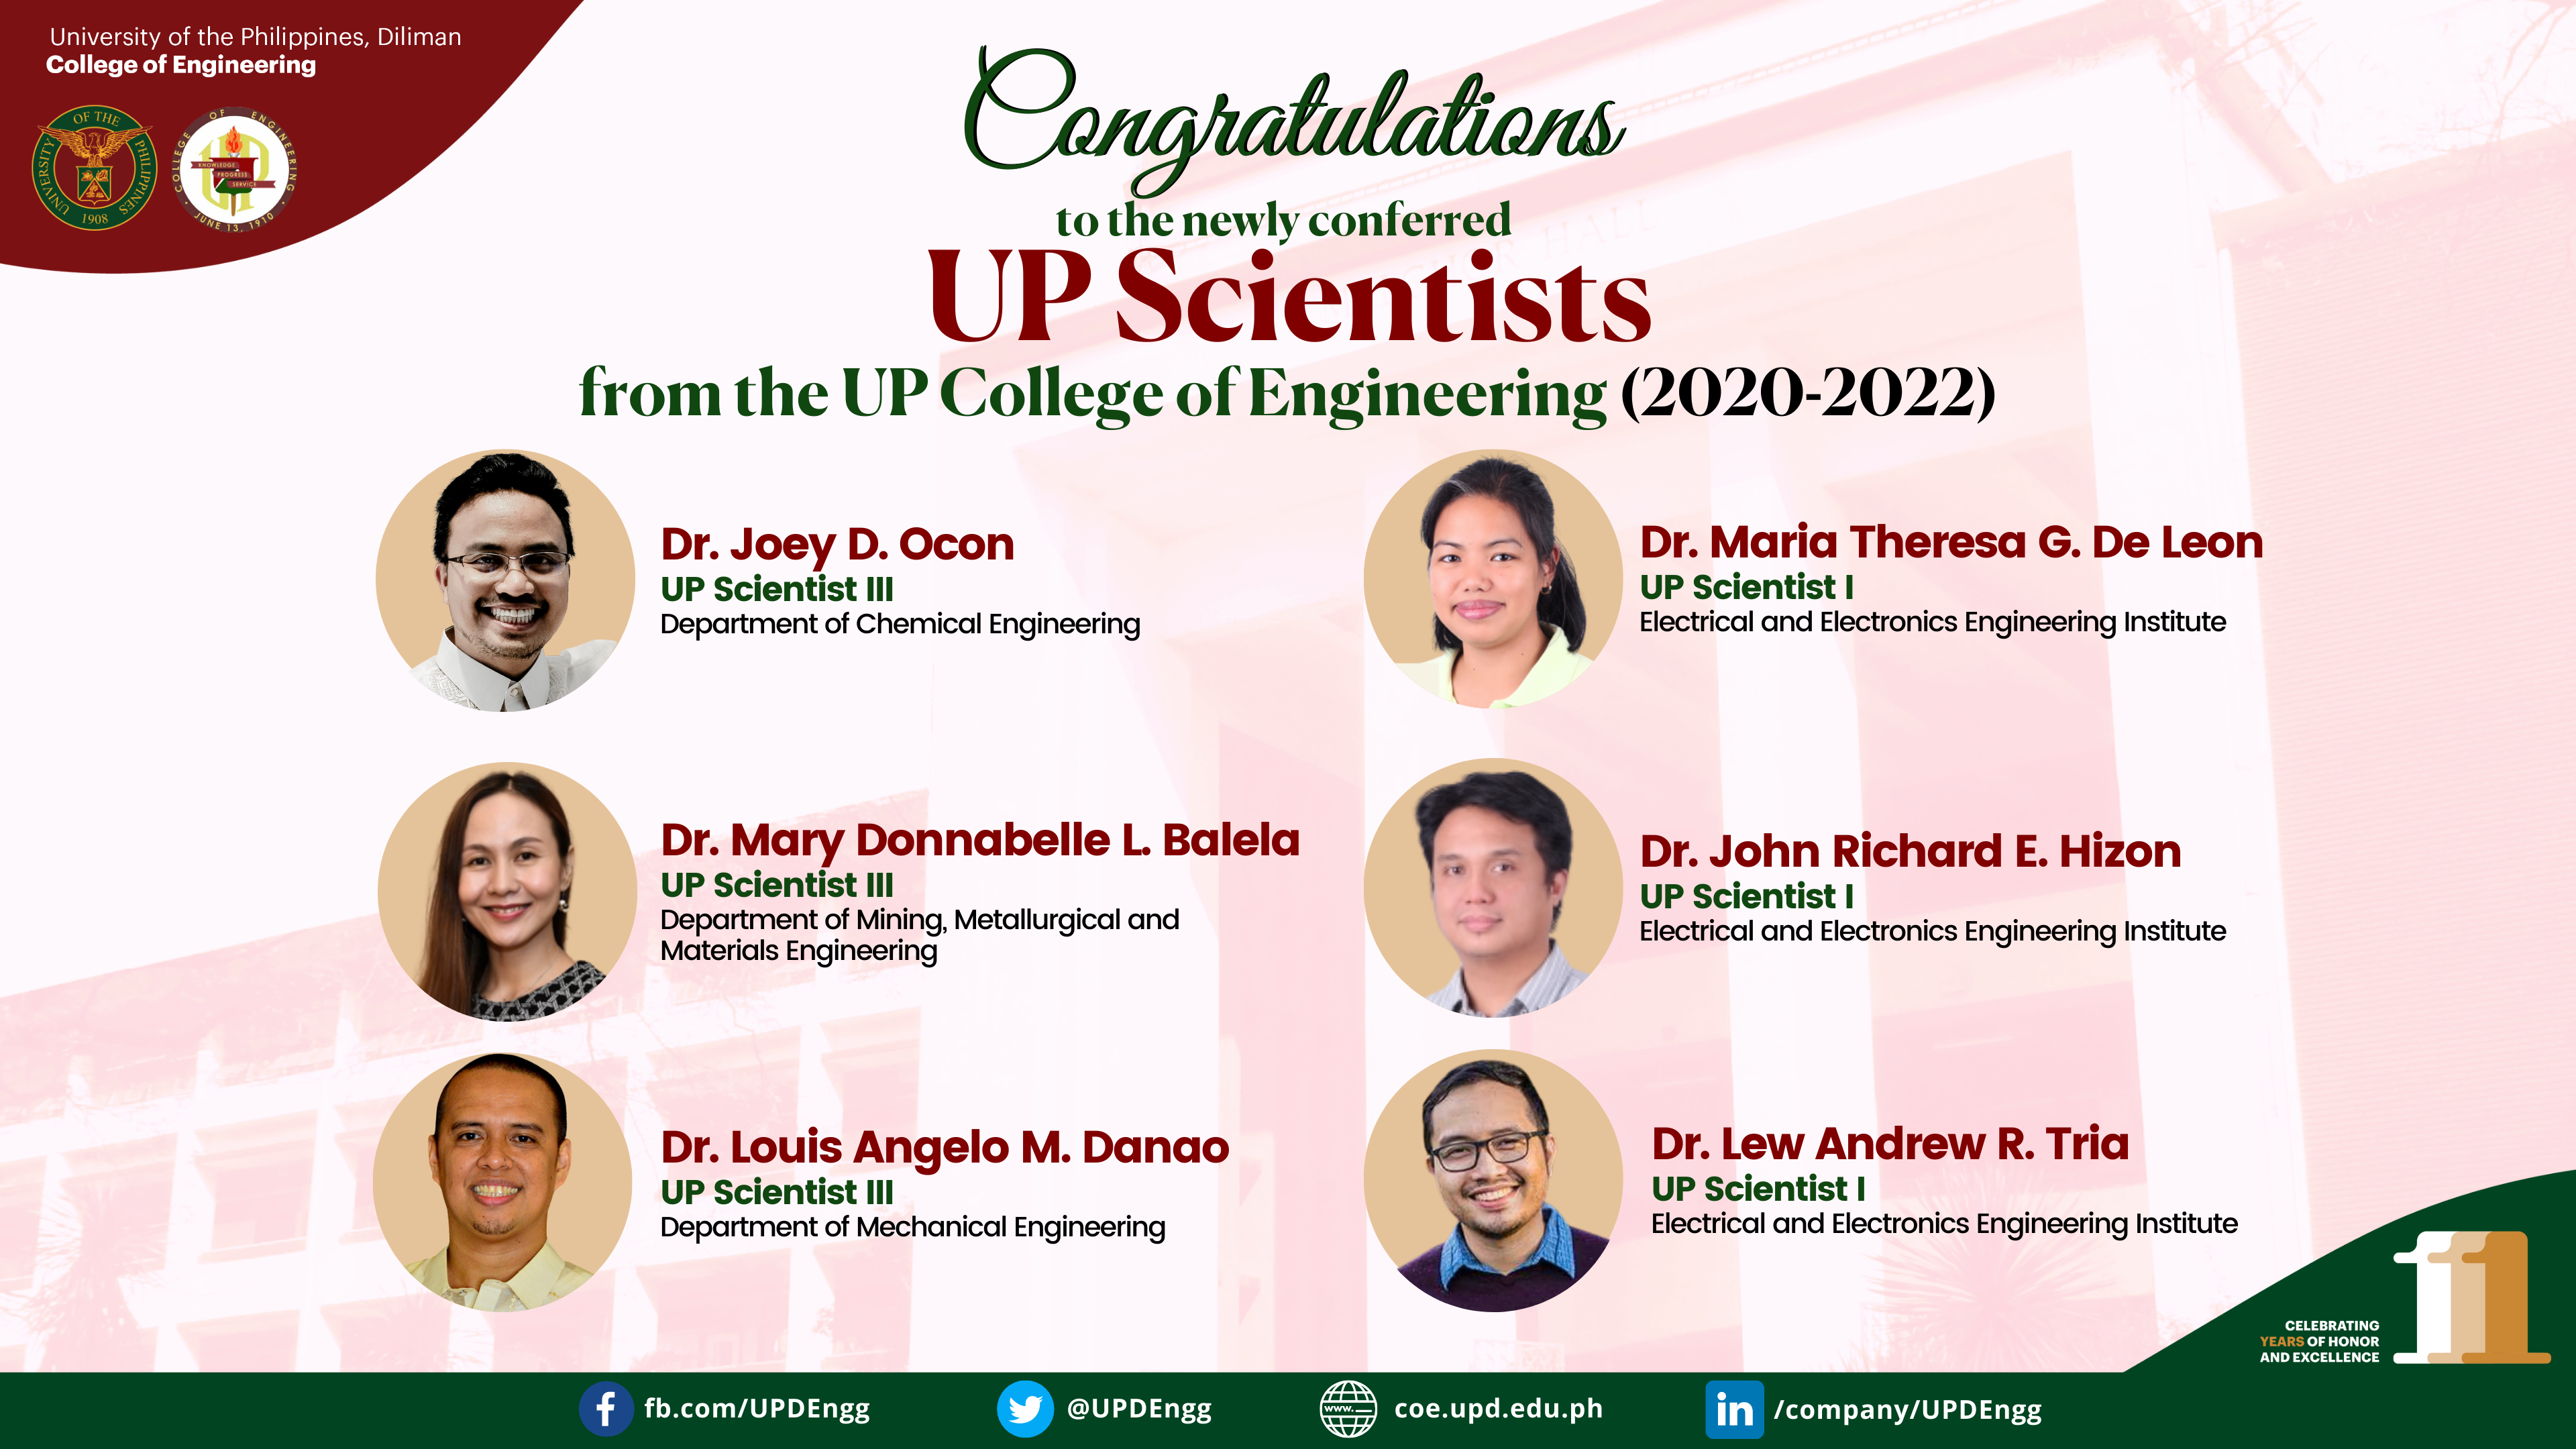 New UP Scientists from the UP College of Engineering (2020-2022)